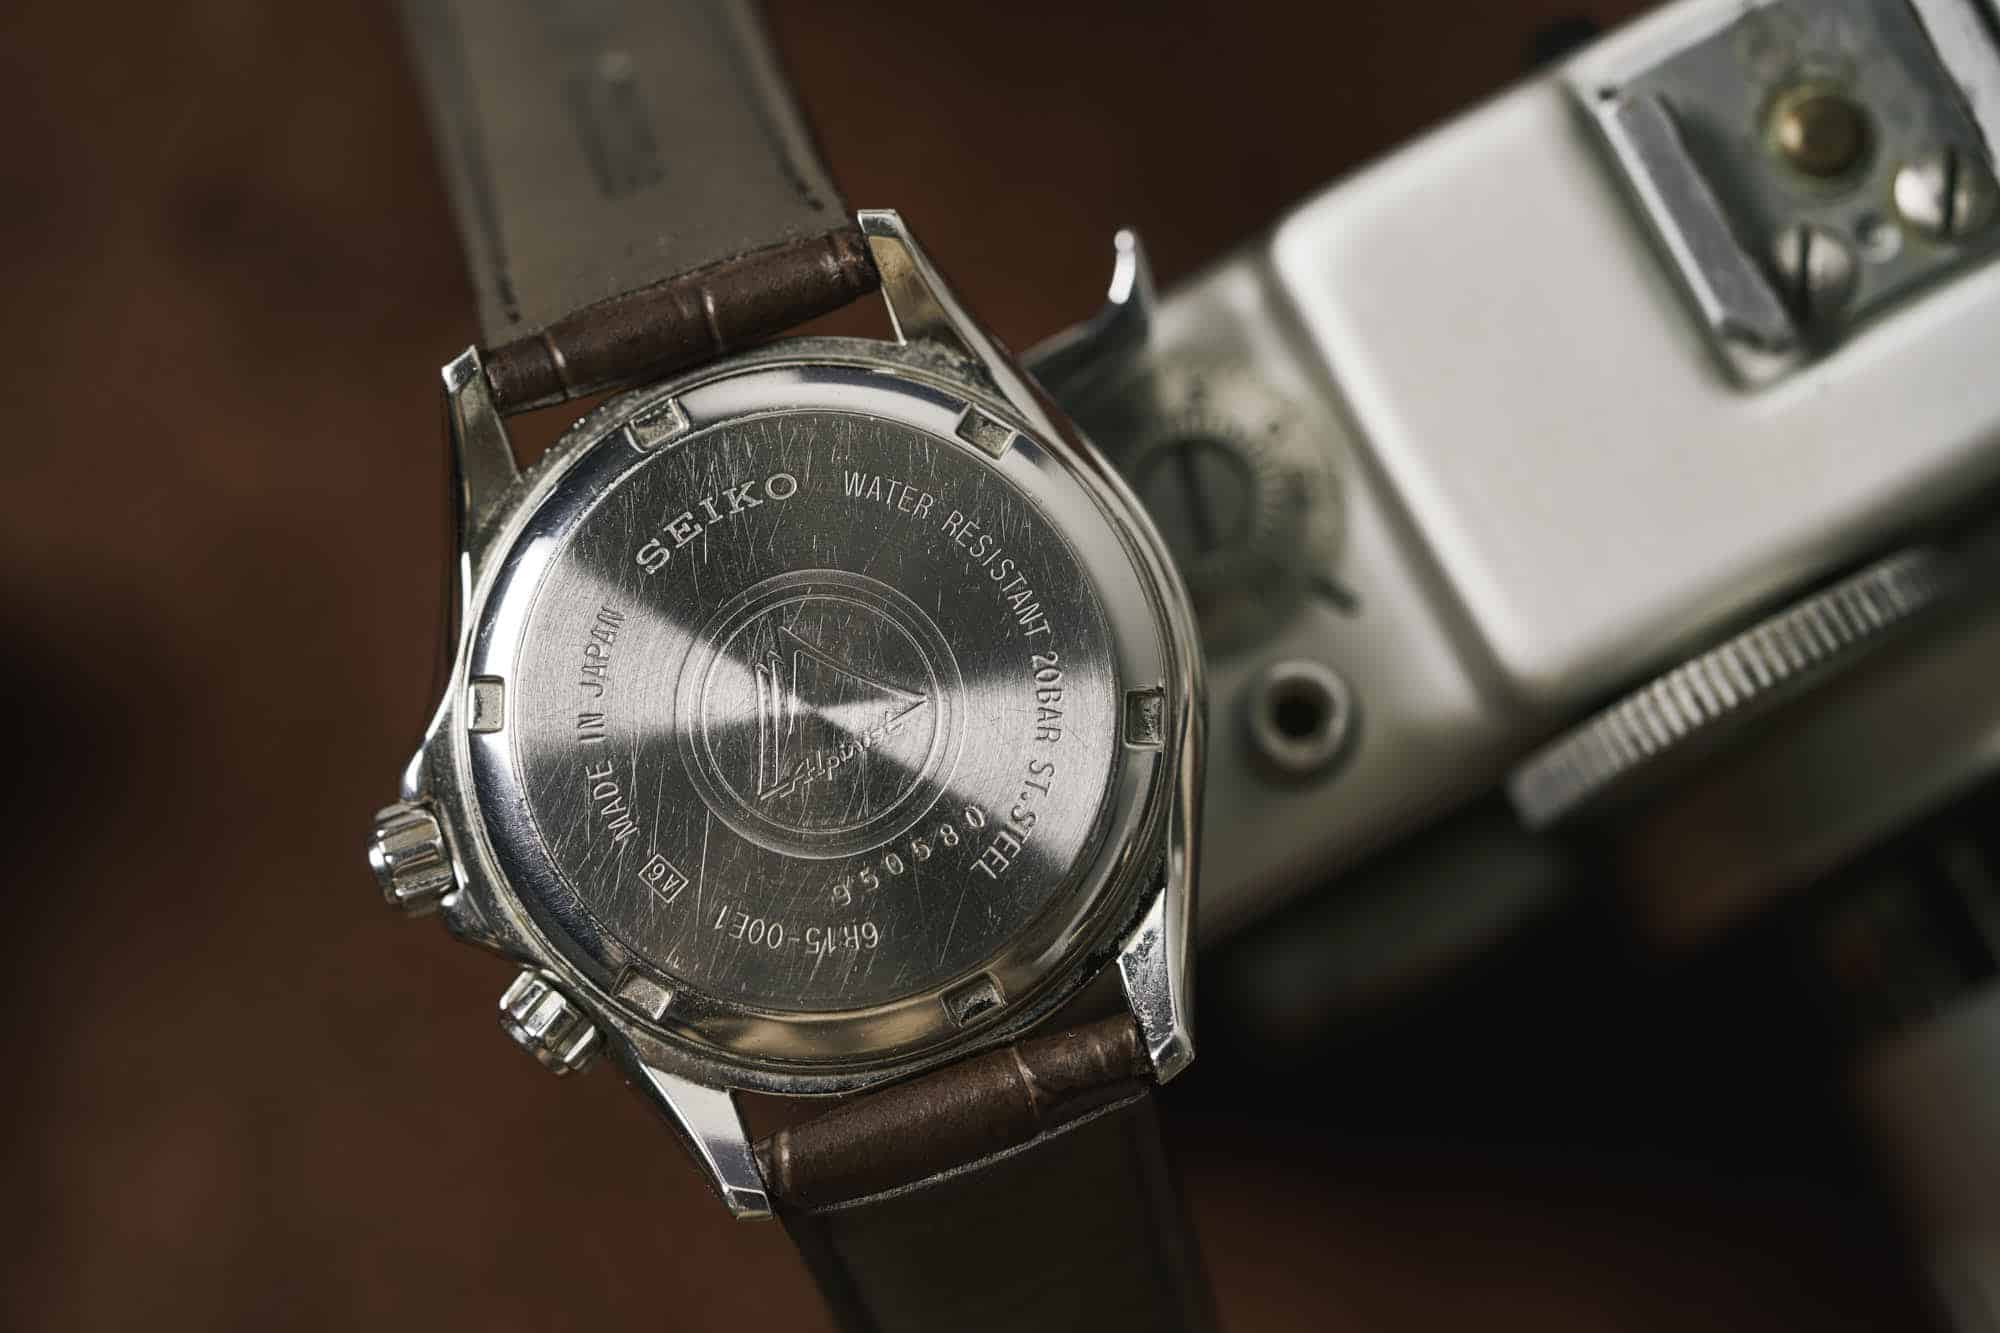 VIDEO] Missed Review: The Seiko Alpinist SARB017 - Worn & Wound